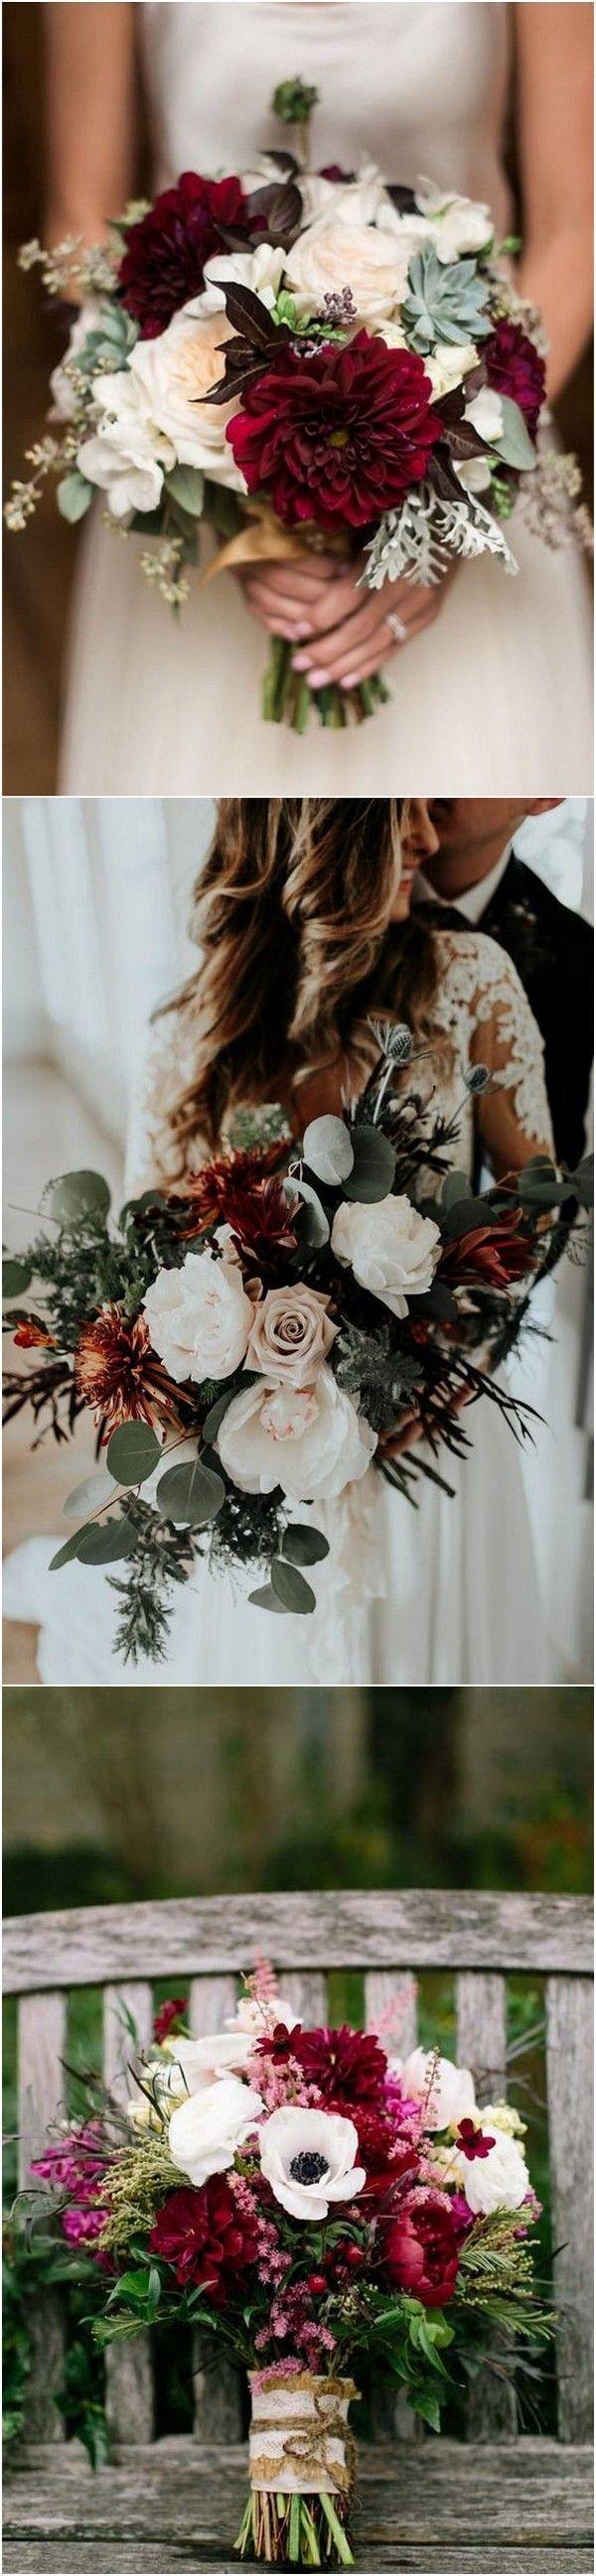 Wedding - Top 20 Fall Wedding Bouquets To Inspire Your Big Day - Page 2 Of 2